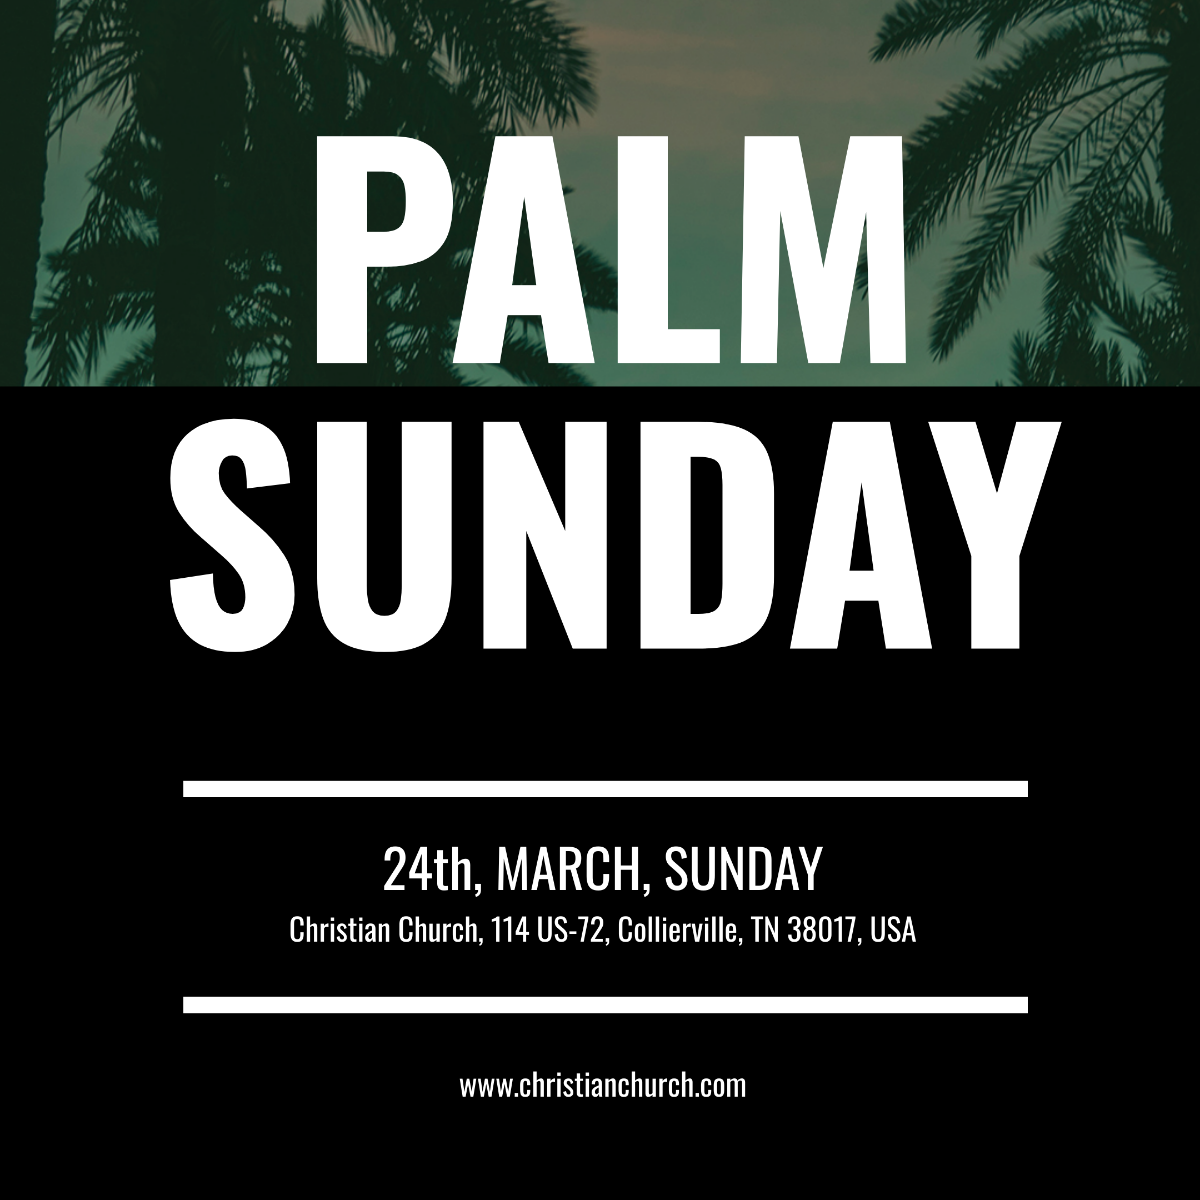 Free Palm Sunday Instagram Post Template